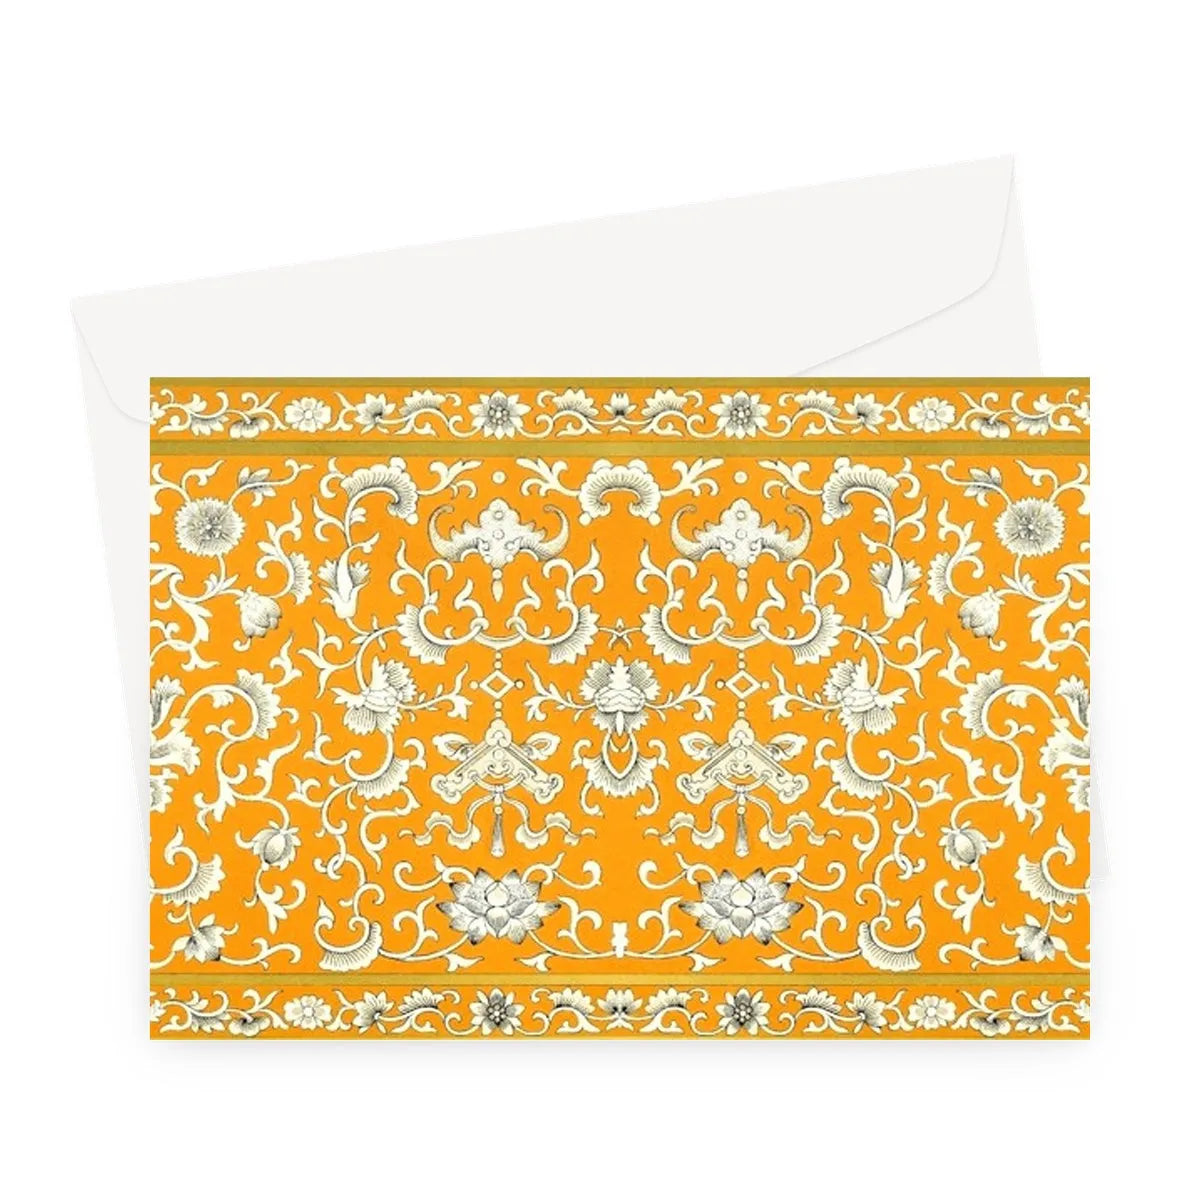 Tangerine Dream Greeting Card - A5 Landscape / 1 Card - Greeting & Note Cards - Aesthetic Art